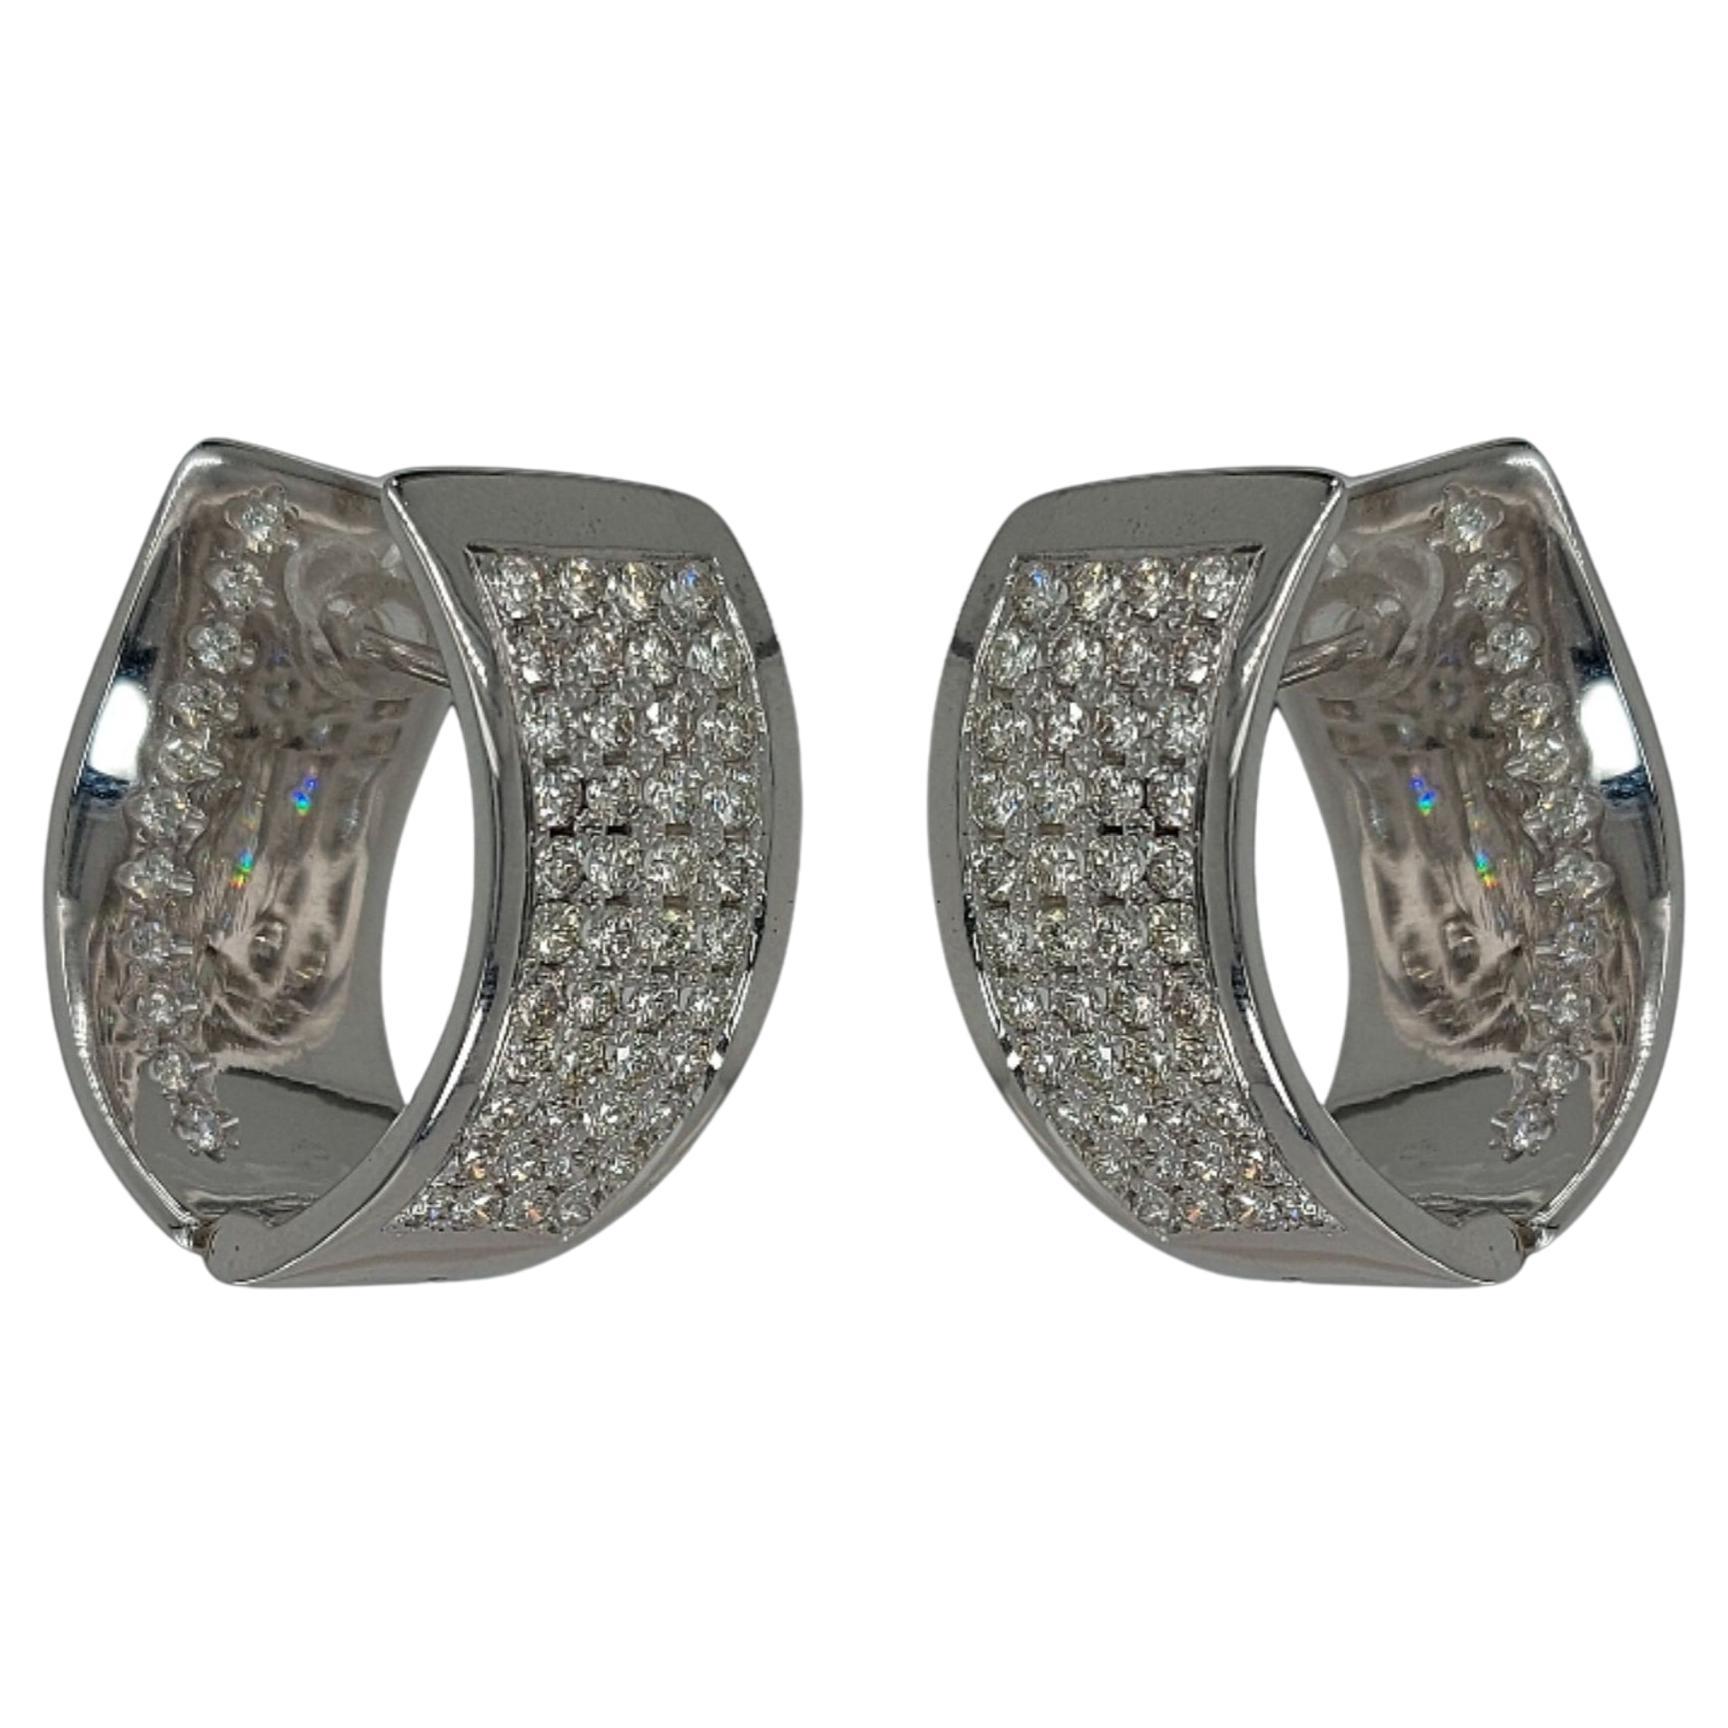 18kt White Gold Clip - On Earrings with Diamonds

Diamonds: brilliant cut diamonds,  ca. 3.30ct

Material: 18kt white gold

Measurements: 13 mm x 25 mm

Total weight: 18.7 grams / 12 dwt / 0.655 oz
